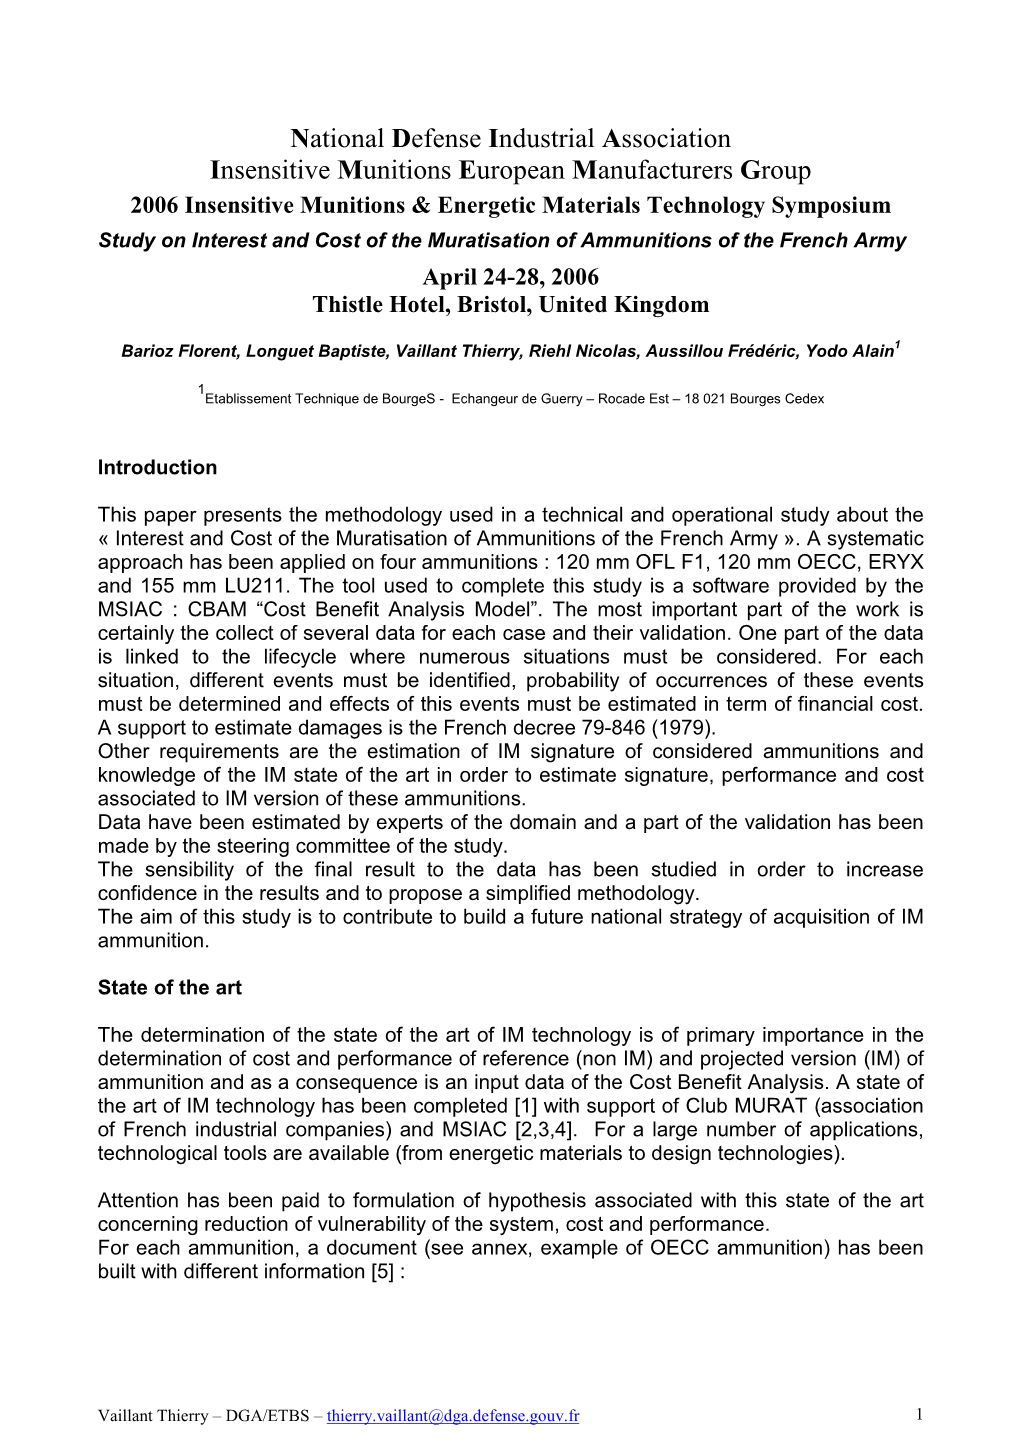 Paper Presents the Methodology Used in a Technical and Operational Study About the « Interest and Cost of the Muratisation of Ammunitions of the French Army »